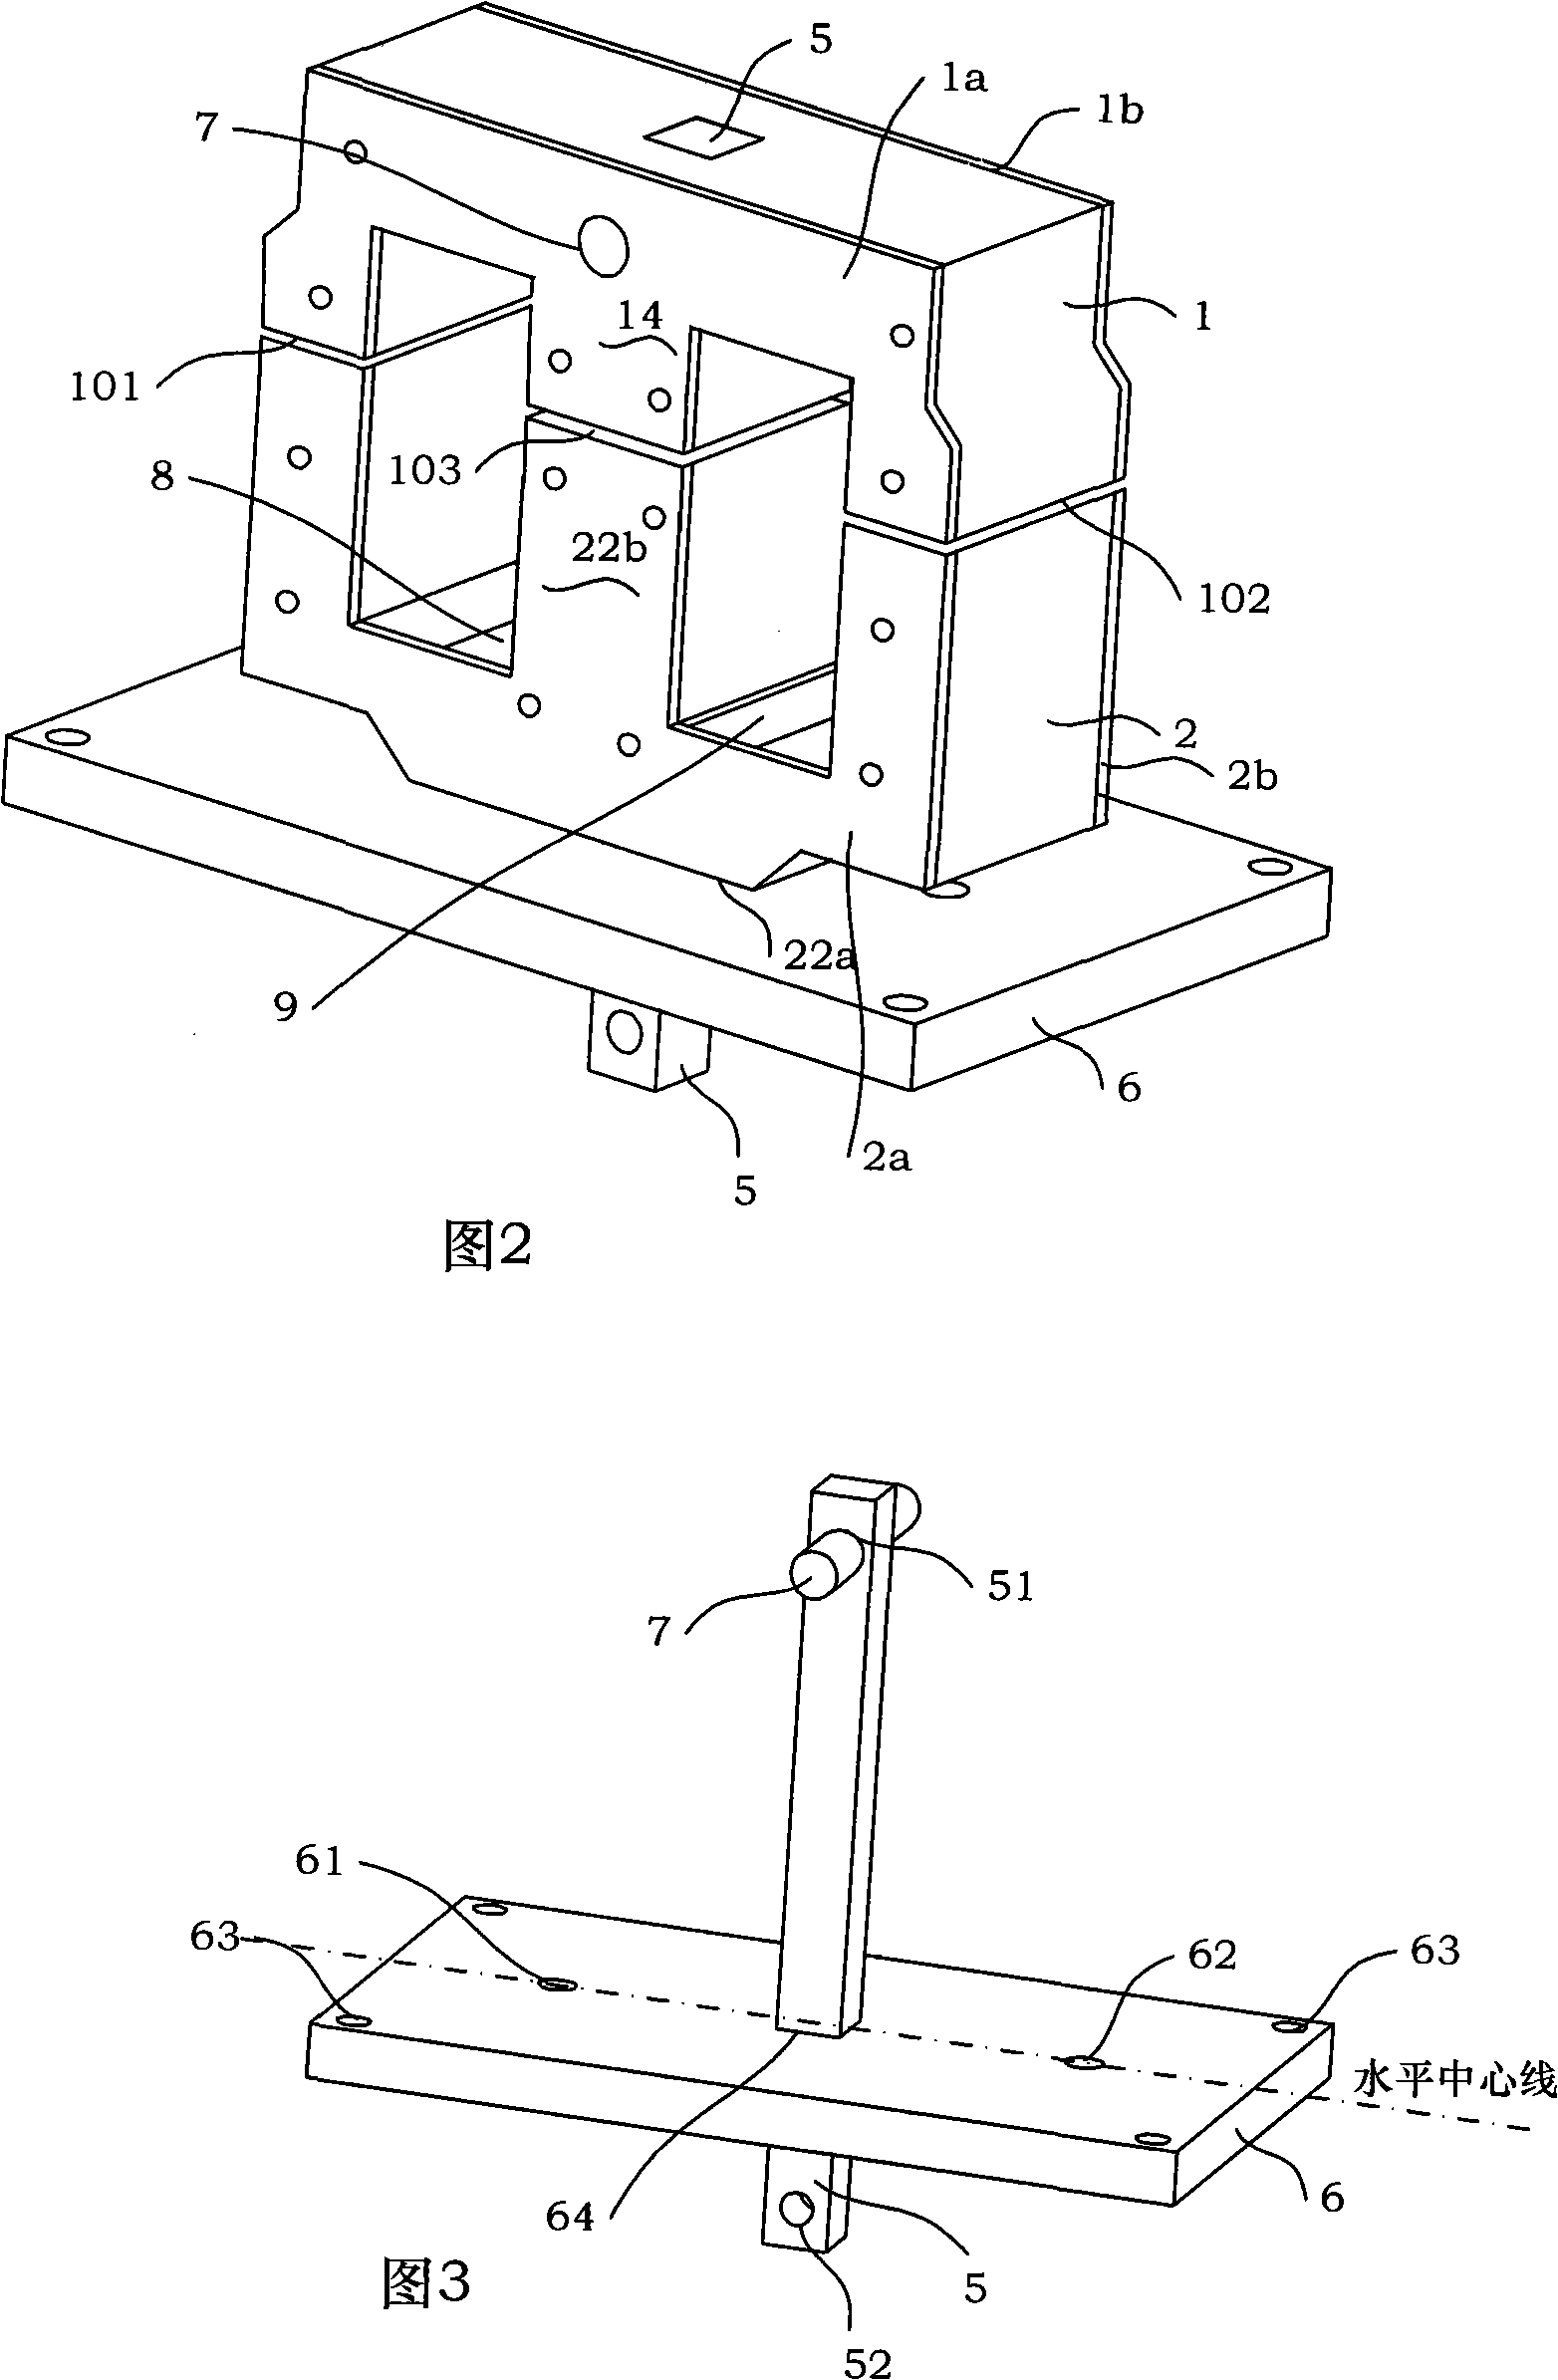 Monostable permanent magnet control mechanism with multiple force output air gaps